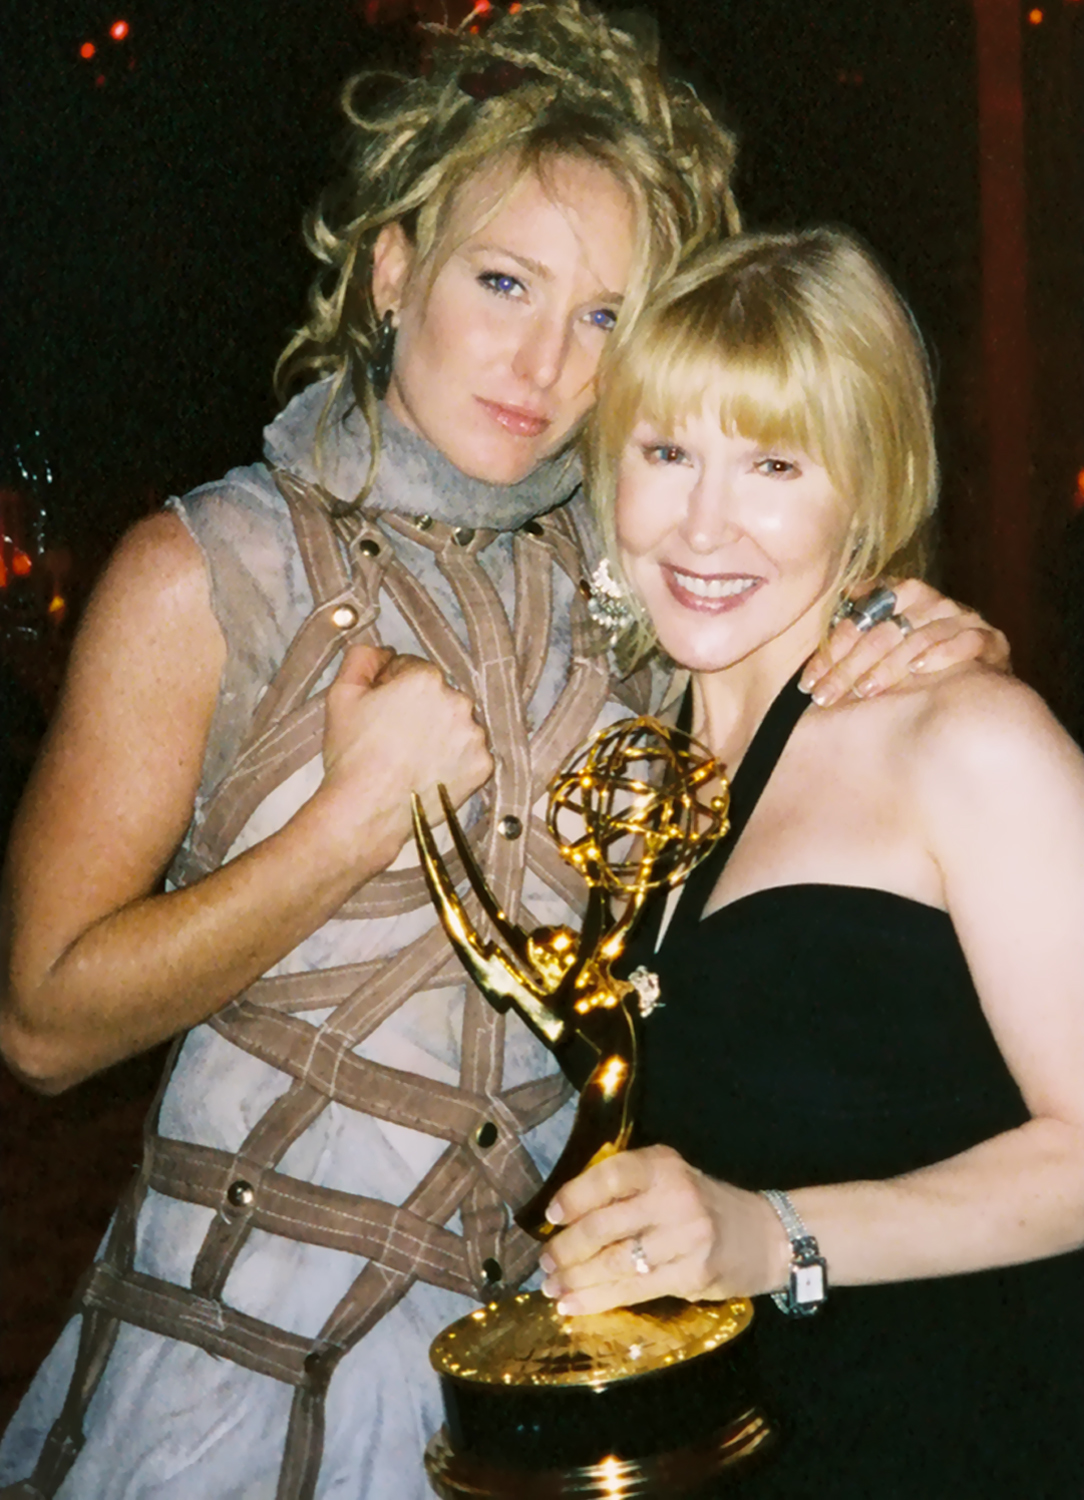 After Party of Emmy Awards, Trish Cook with good friend 'Gillian Anderson' ... Emmy Winner for Outstanding Lead Actress.